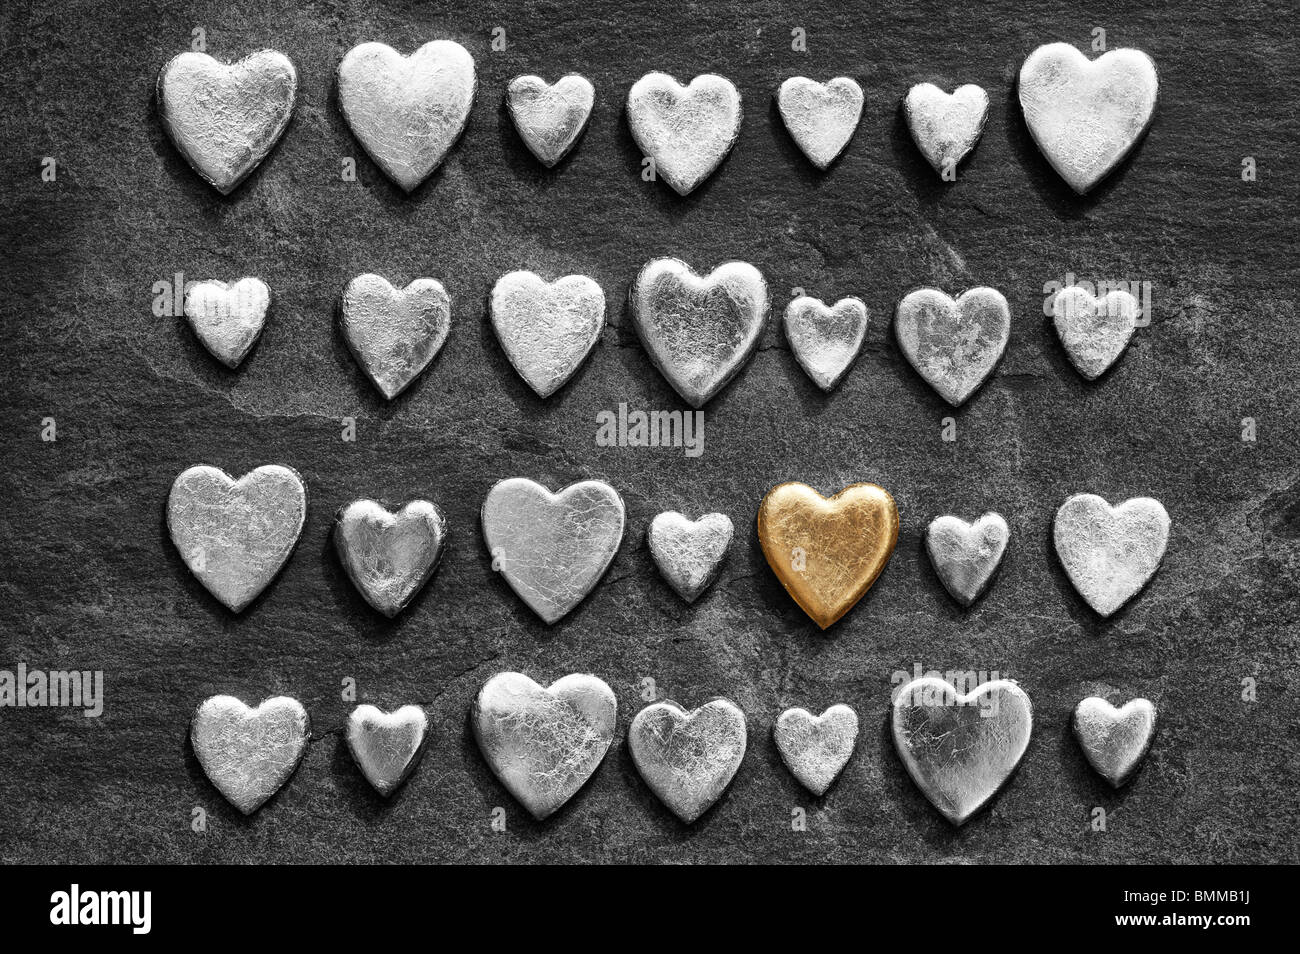 Gold heart shape against slate background with monochrome hearts Stock Photo